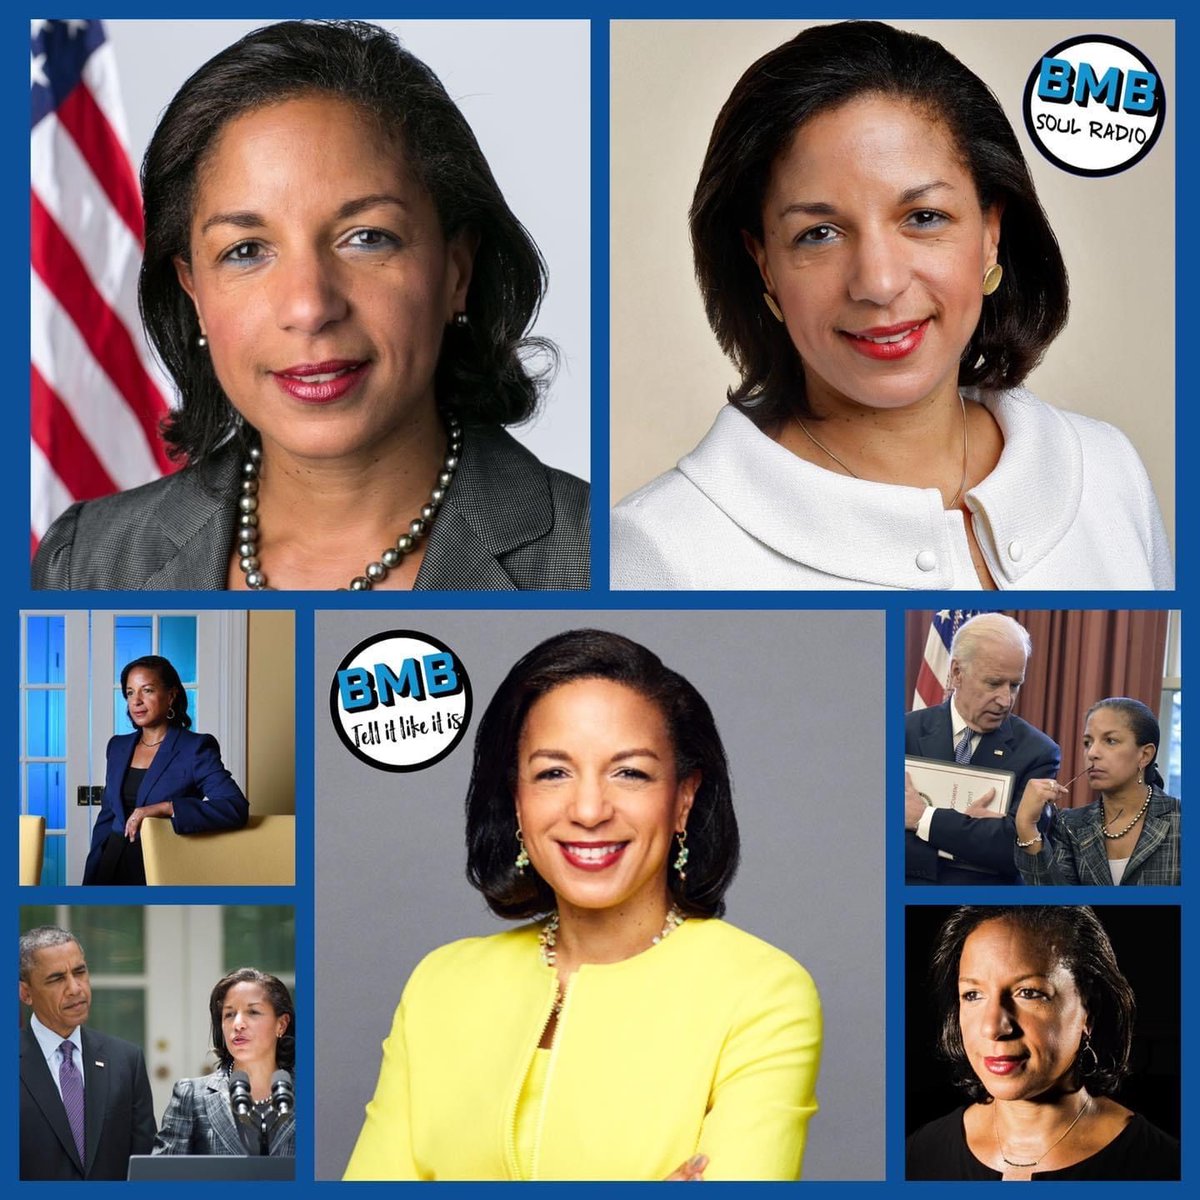 🎉🎂🎁🥳🎈Happy Birthday to the Director of the United States Domestic Policy Council Susan Rice. She turns 59!
#happybirthday #SusanRice #DomesticPolicy #obama #biden #blackexcellence #badwoman